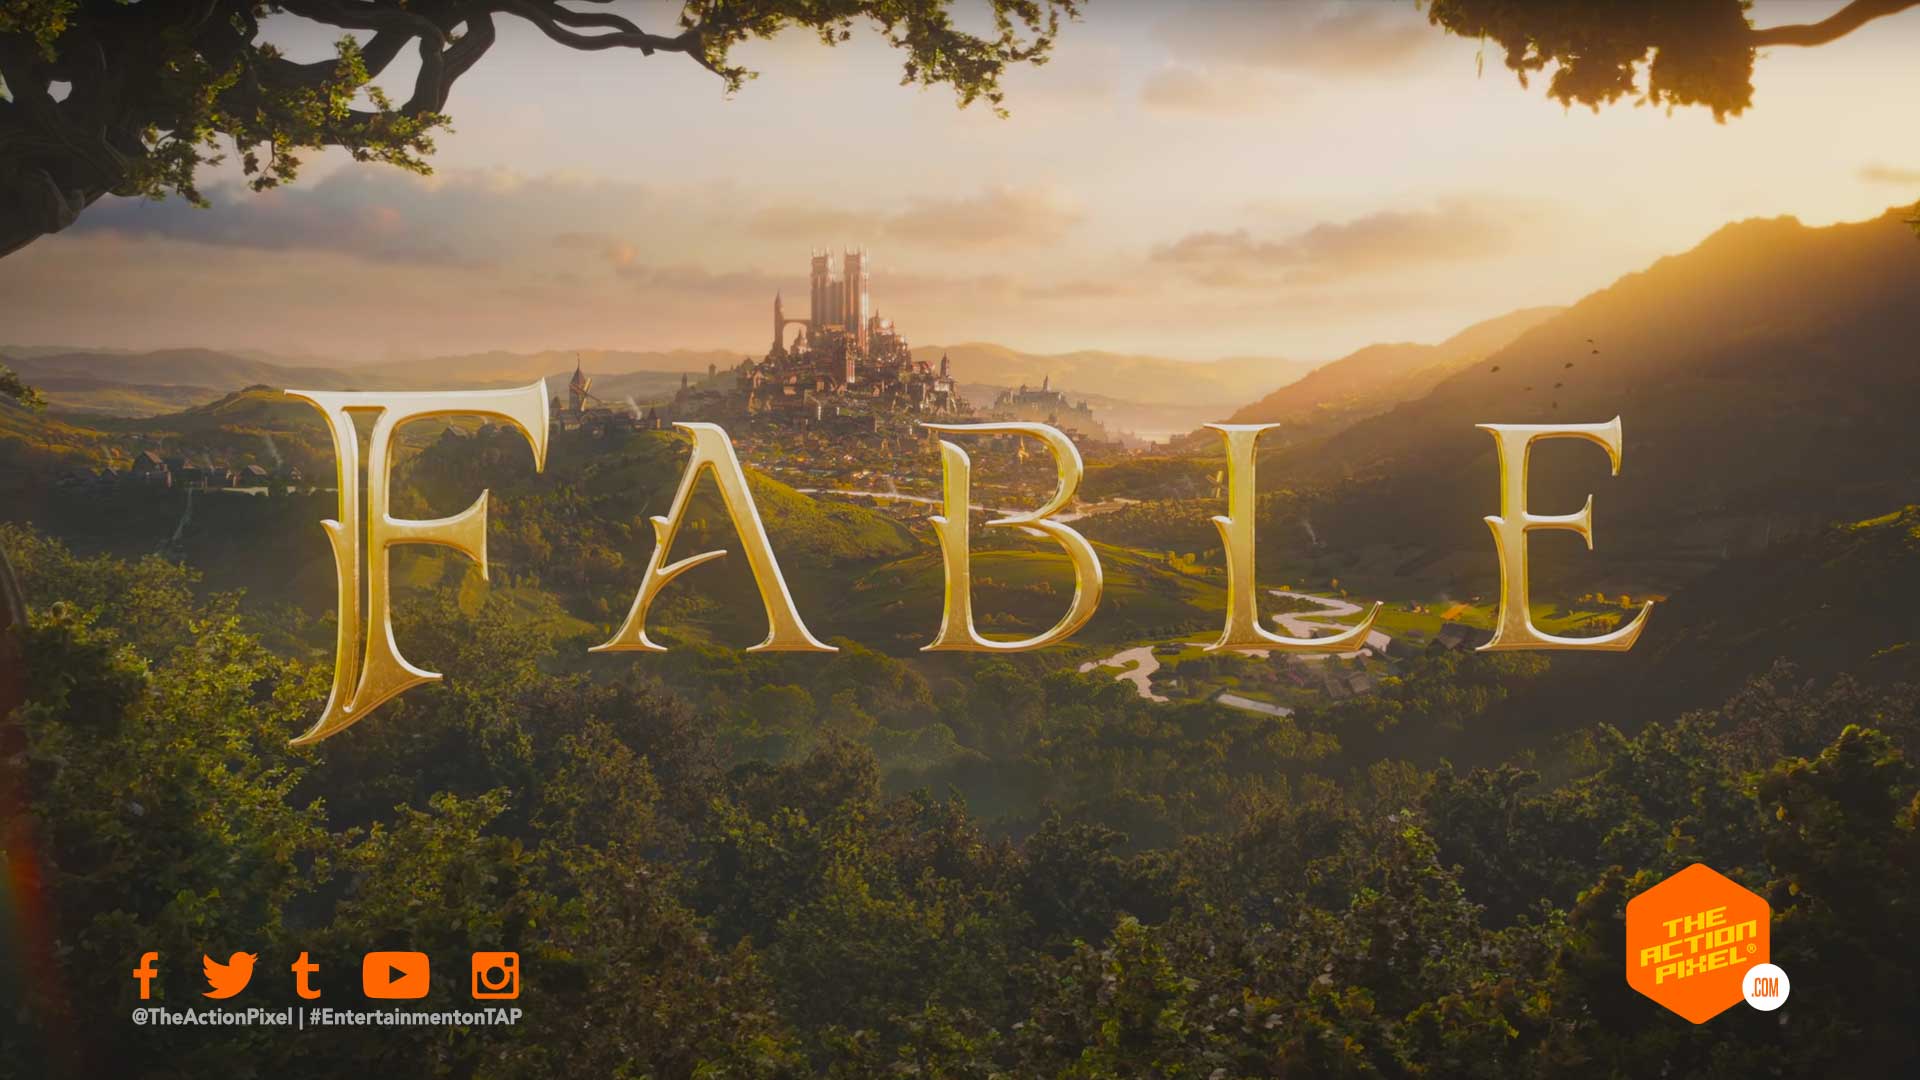 fable, Xbox, Xbox360, xbox 360, Xbox One, Fable, RPG, MMO, fairy tale, fairy, faerie, frog, albion, action, reboot, Playground, Lionhead, Deepwood, Fortune,, Legends, Xbox Series X, Xbox Games Showcase, Optimized for Xbox ,Series X, Xbox Game Pass,featured, the action pixel, entertainment on tap